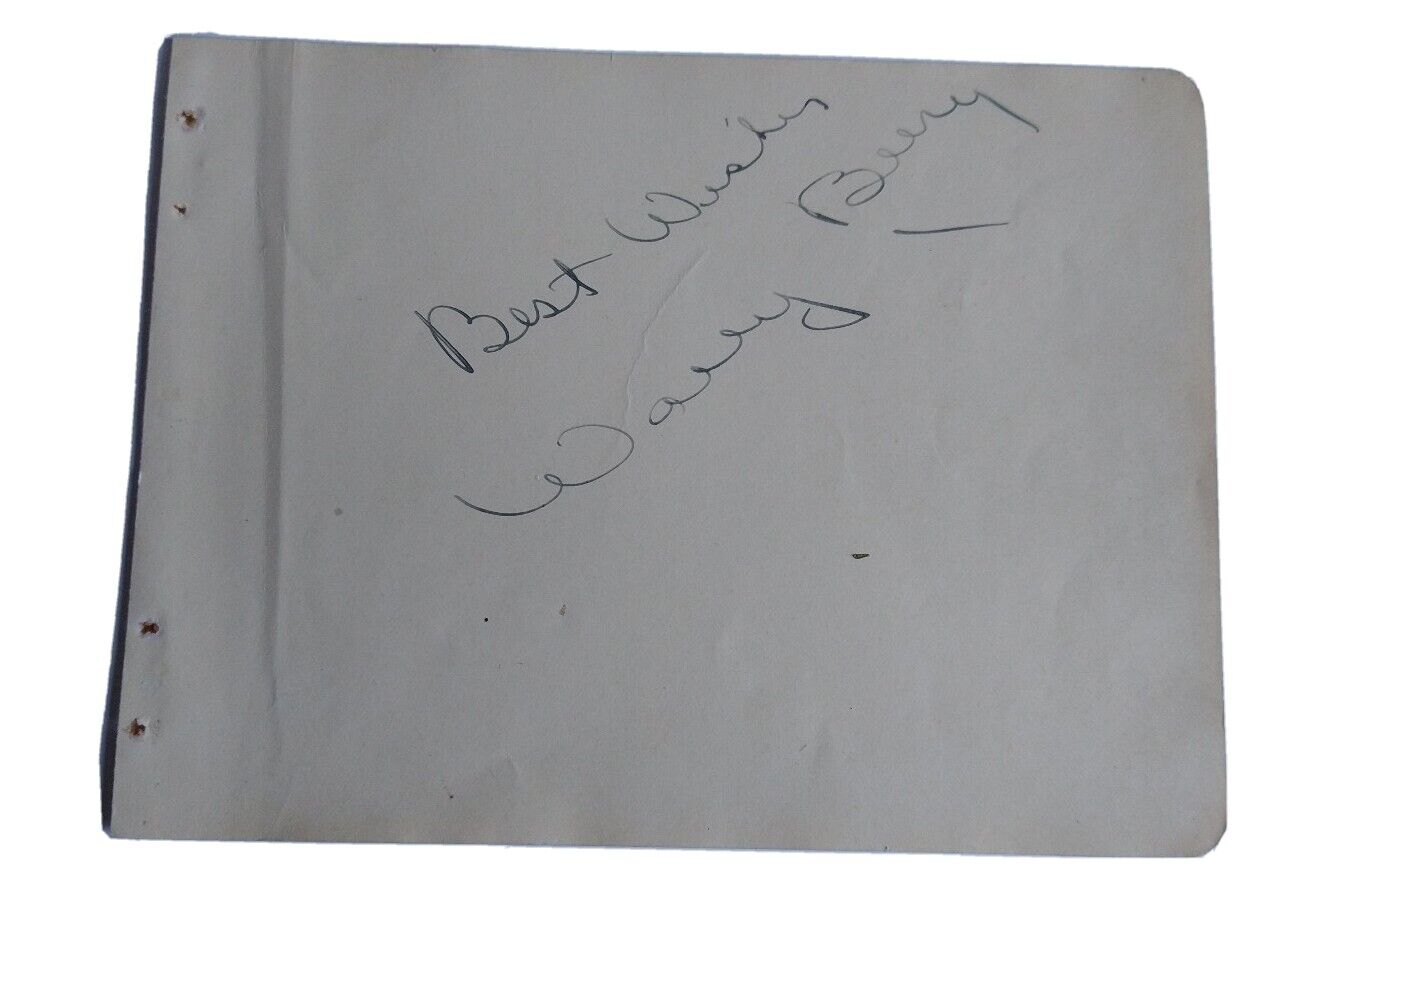 Wally Wallace Berry Signed Autograph Page [40s]